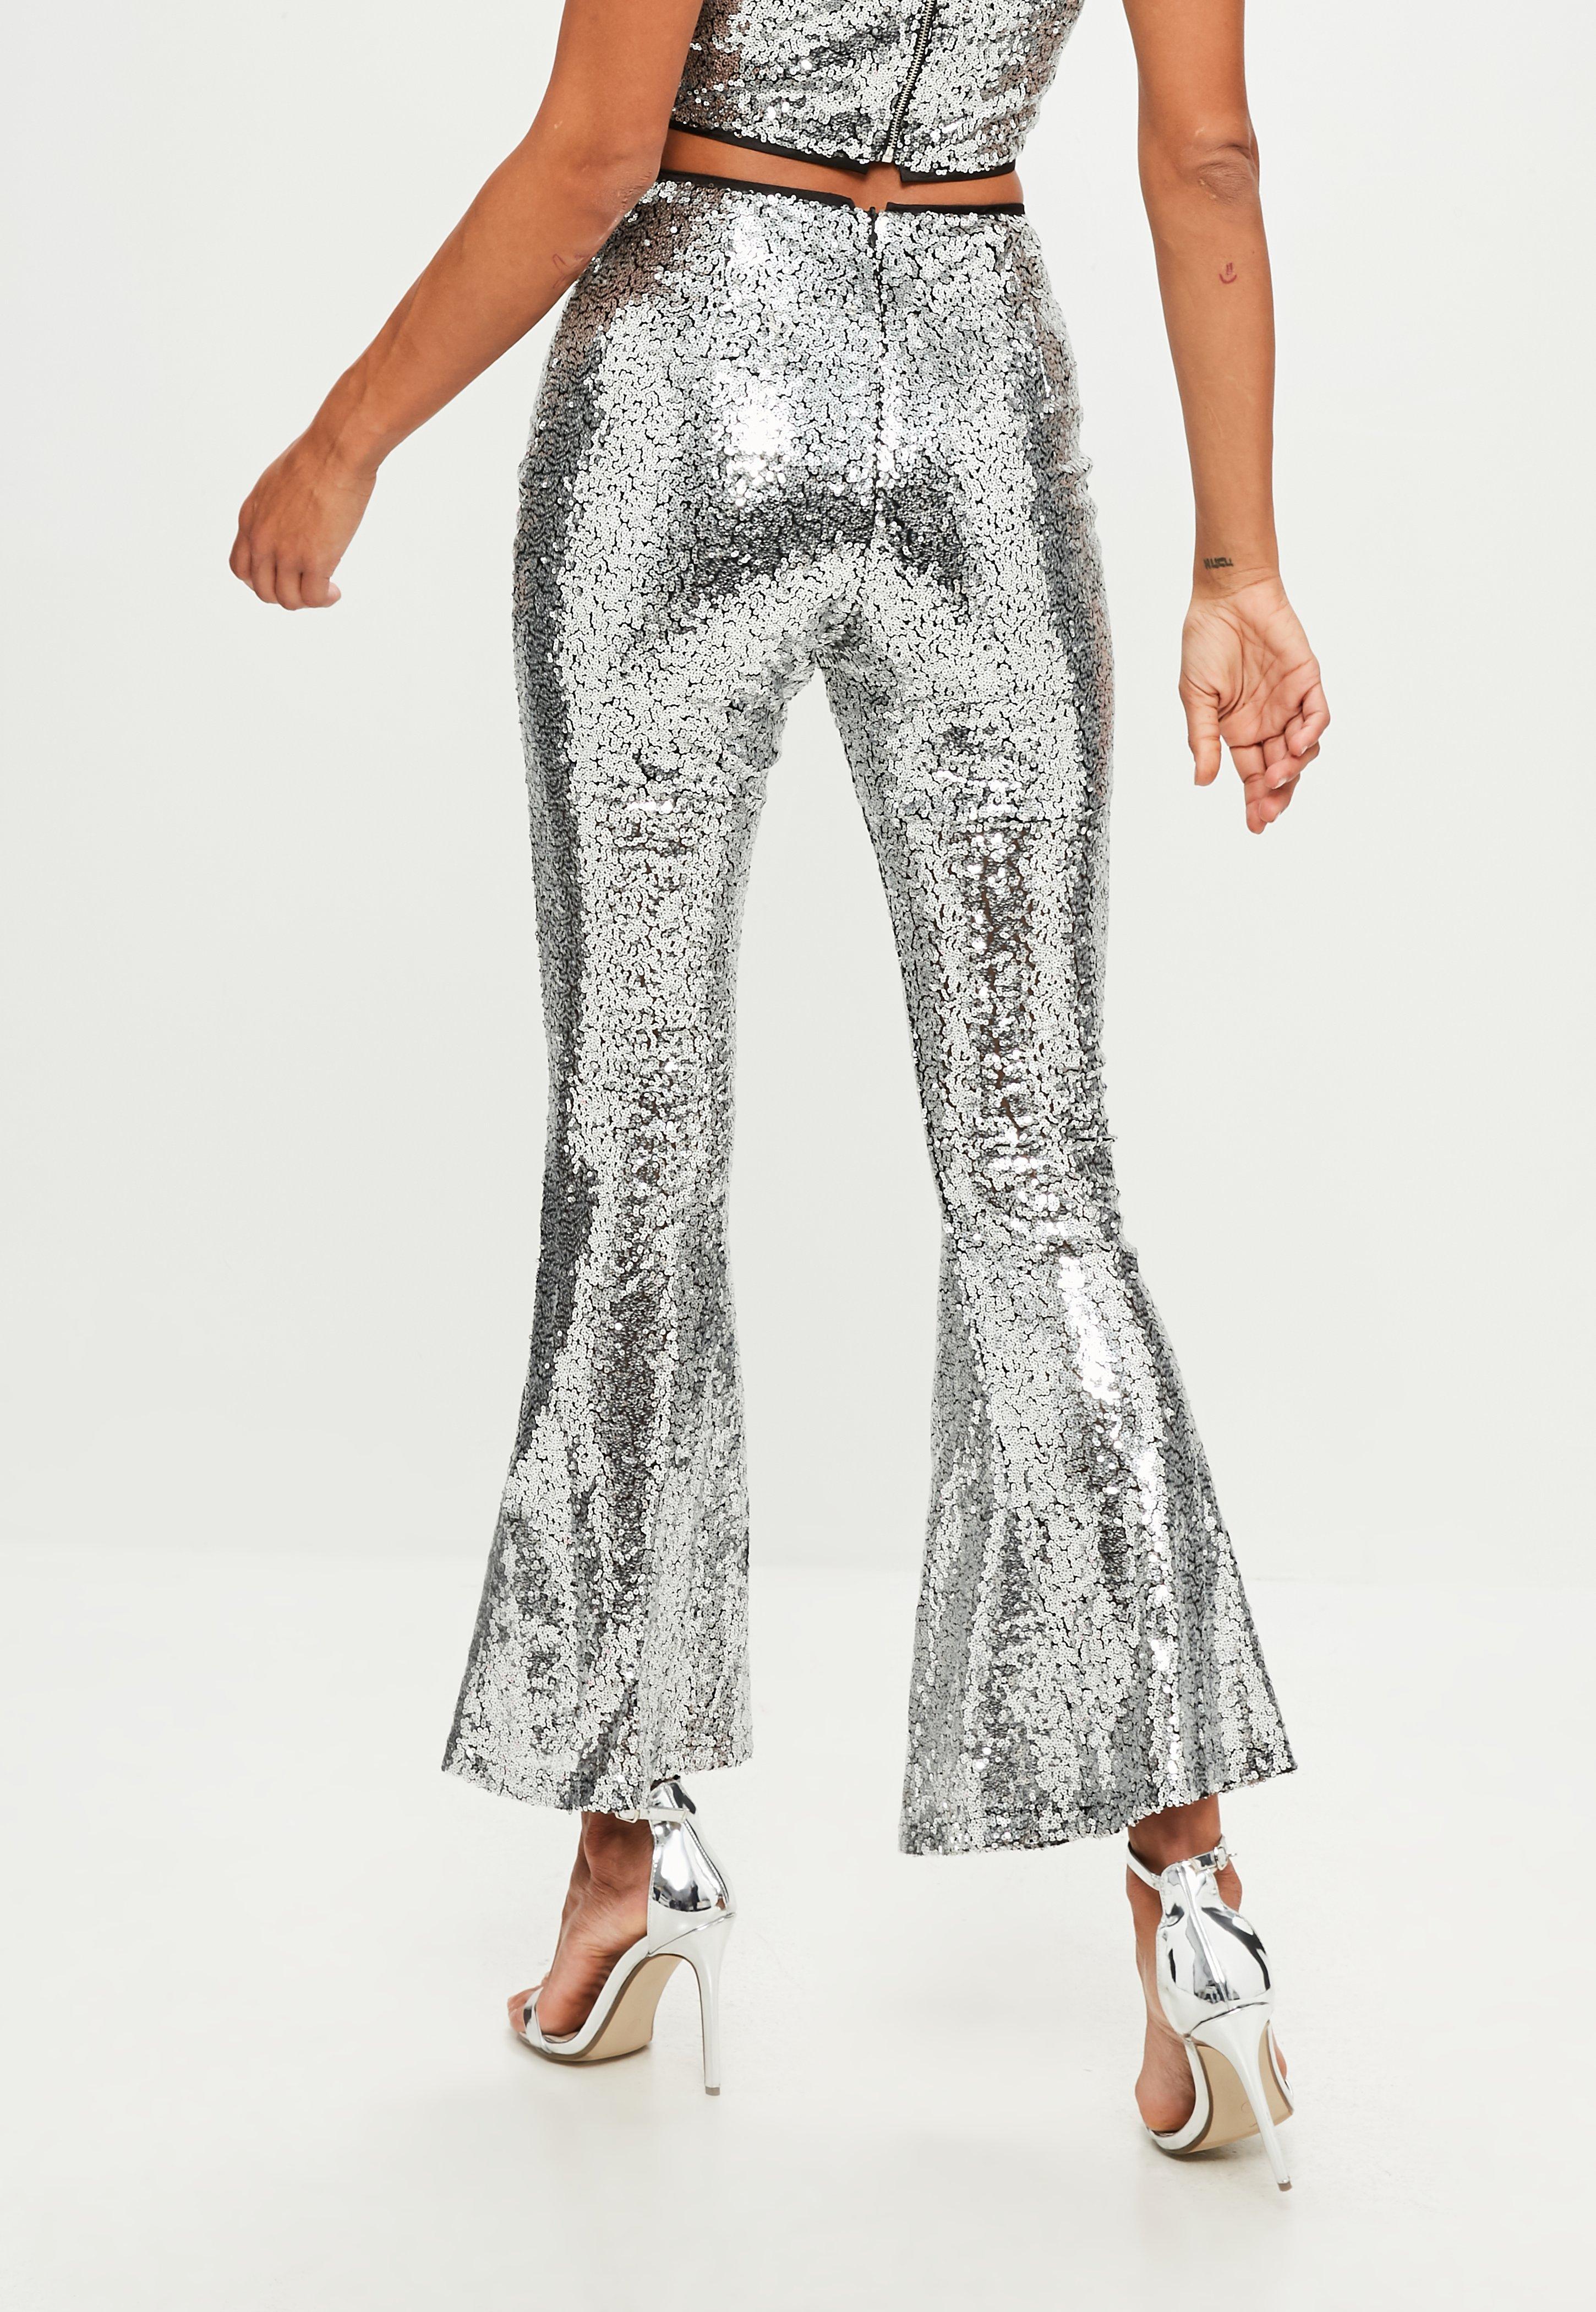 Missguided Synthetic Petite Silver Sequin Flare Trouser in Metallic - Lyst